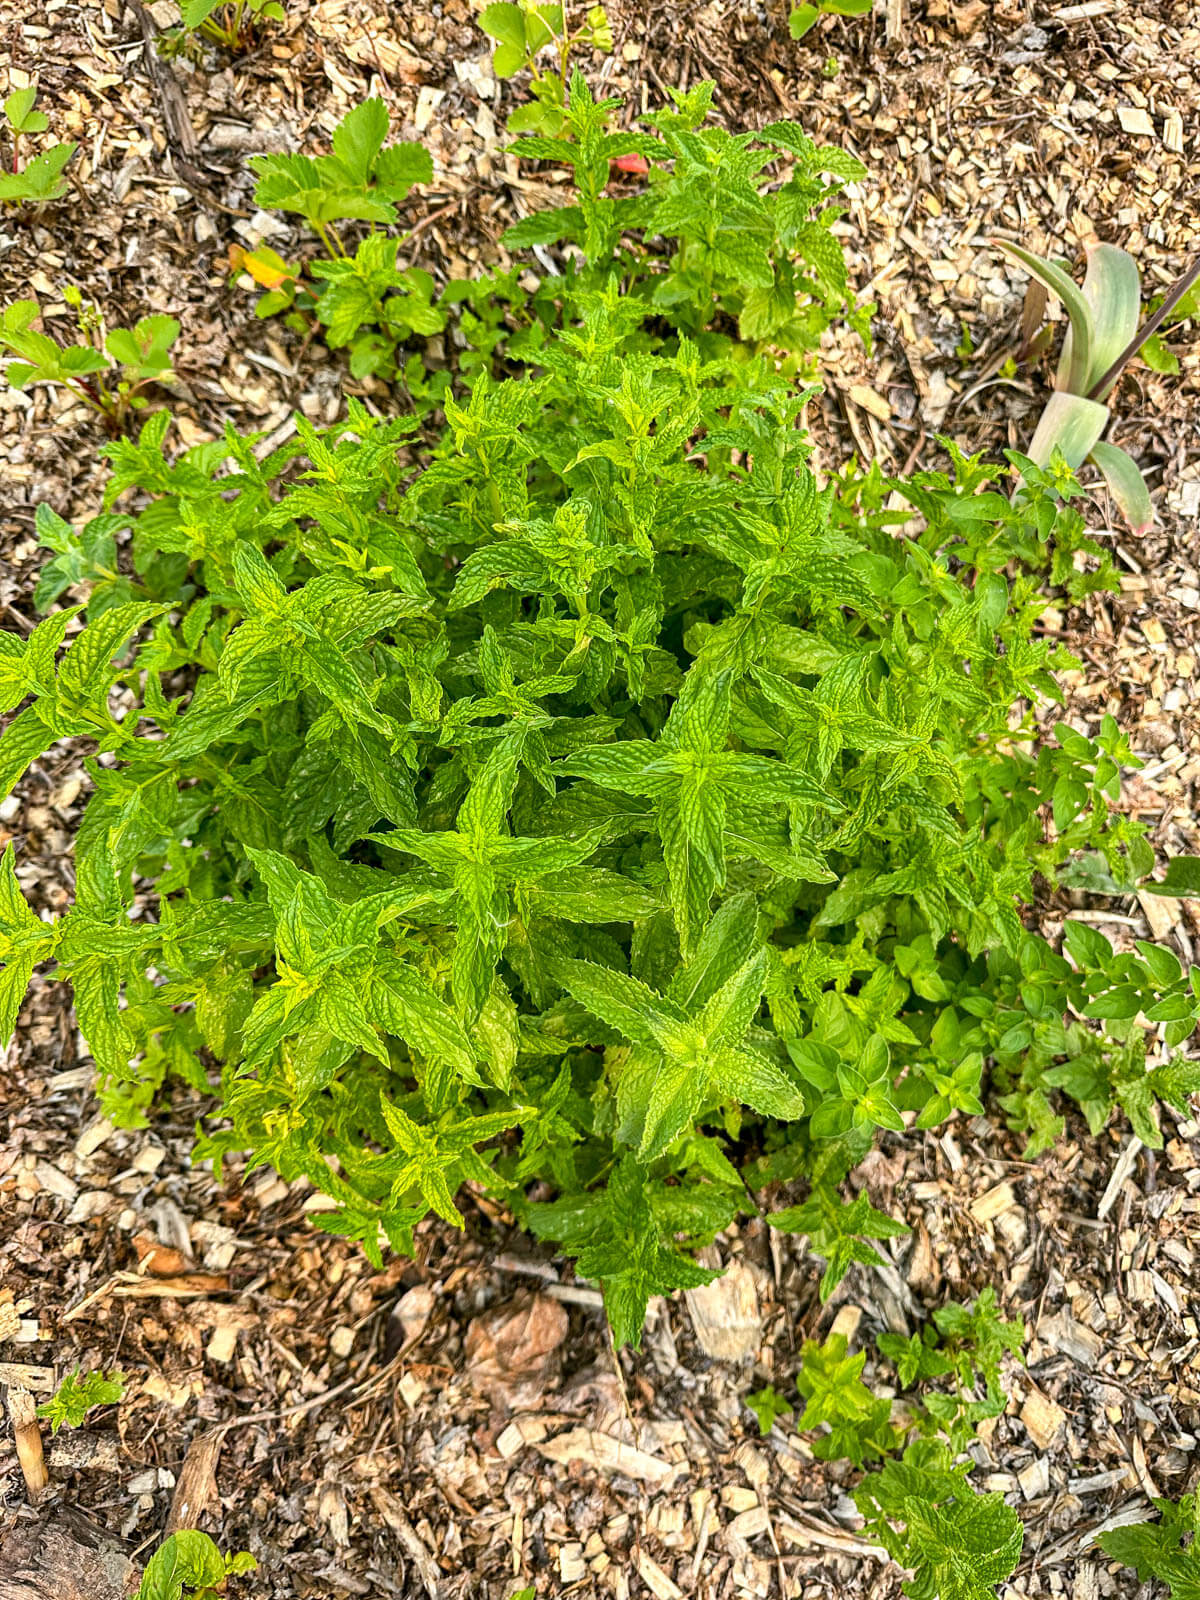 Bountiful mint plant in wood chips. 